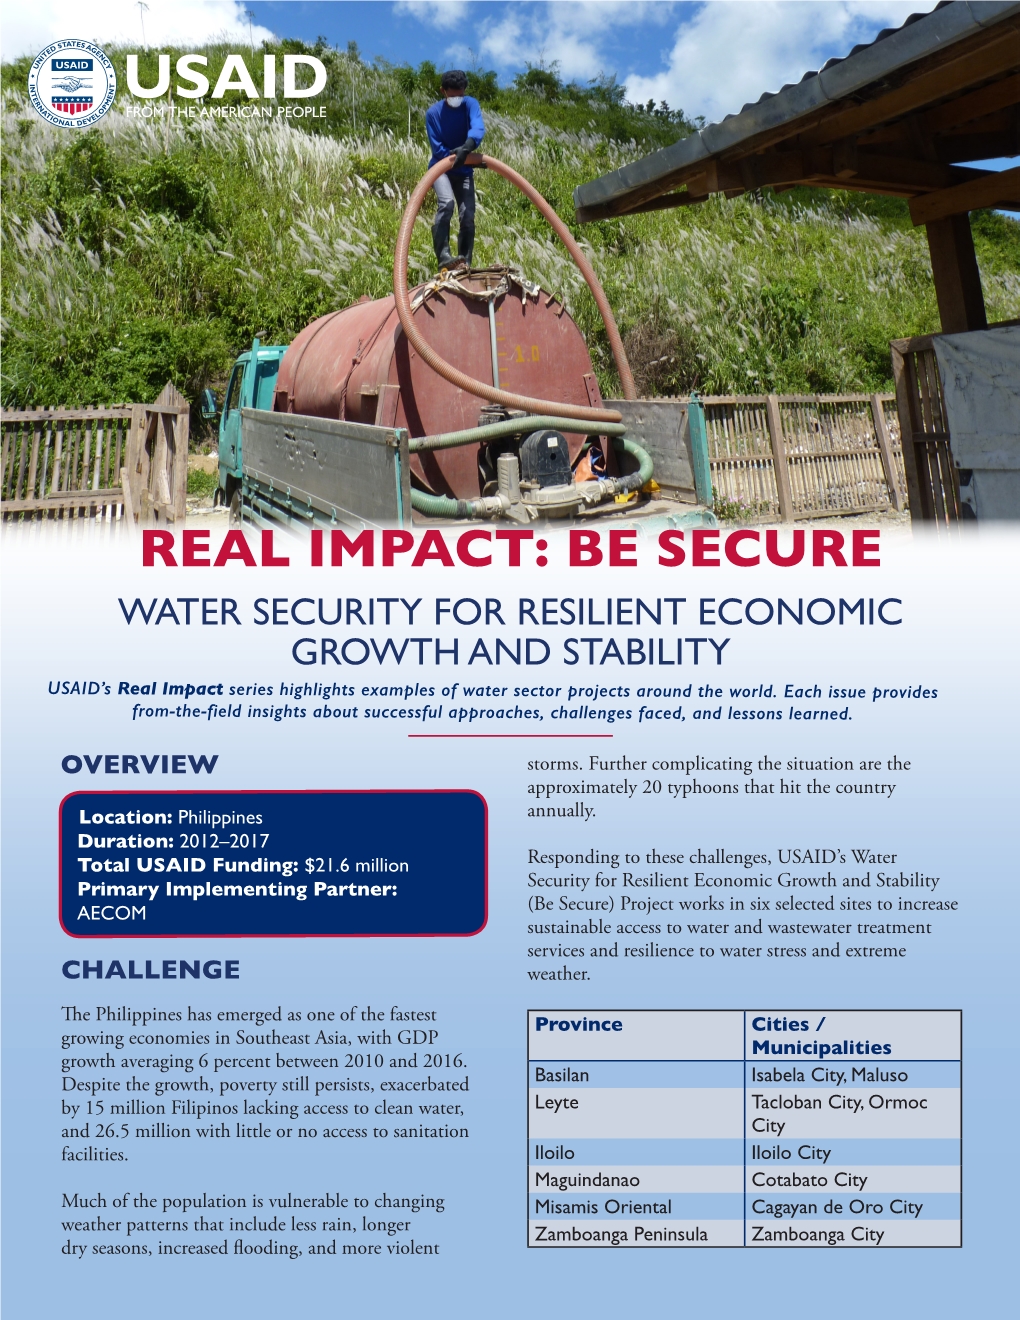 Real Impact: Be Secure Project